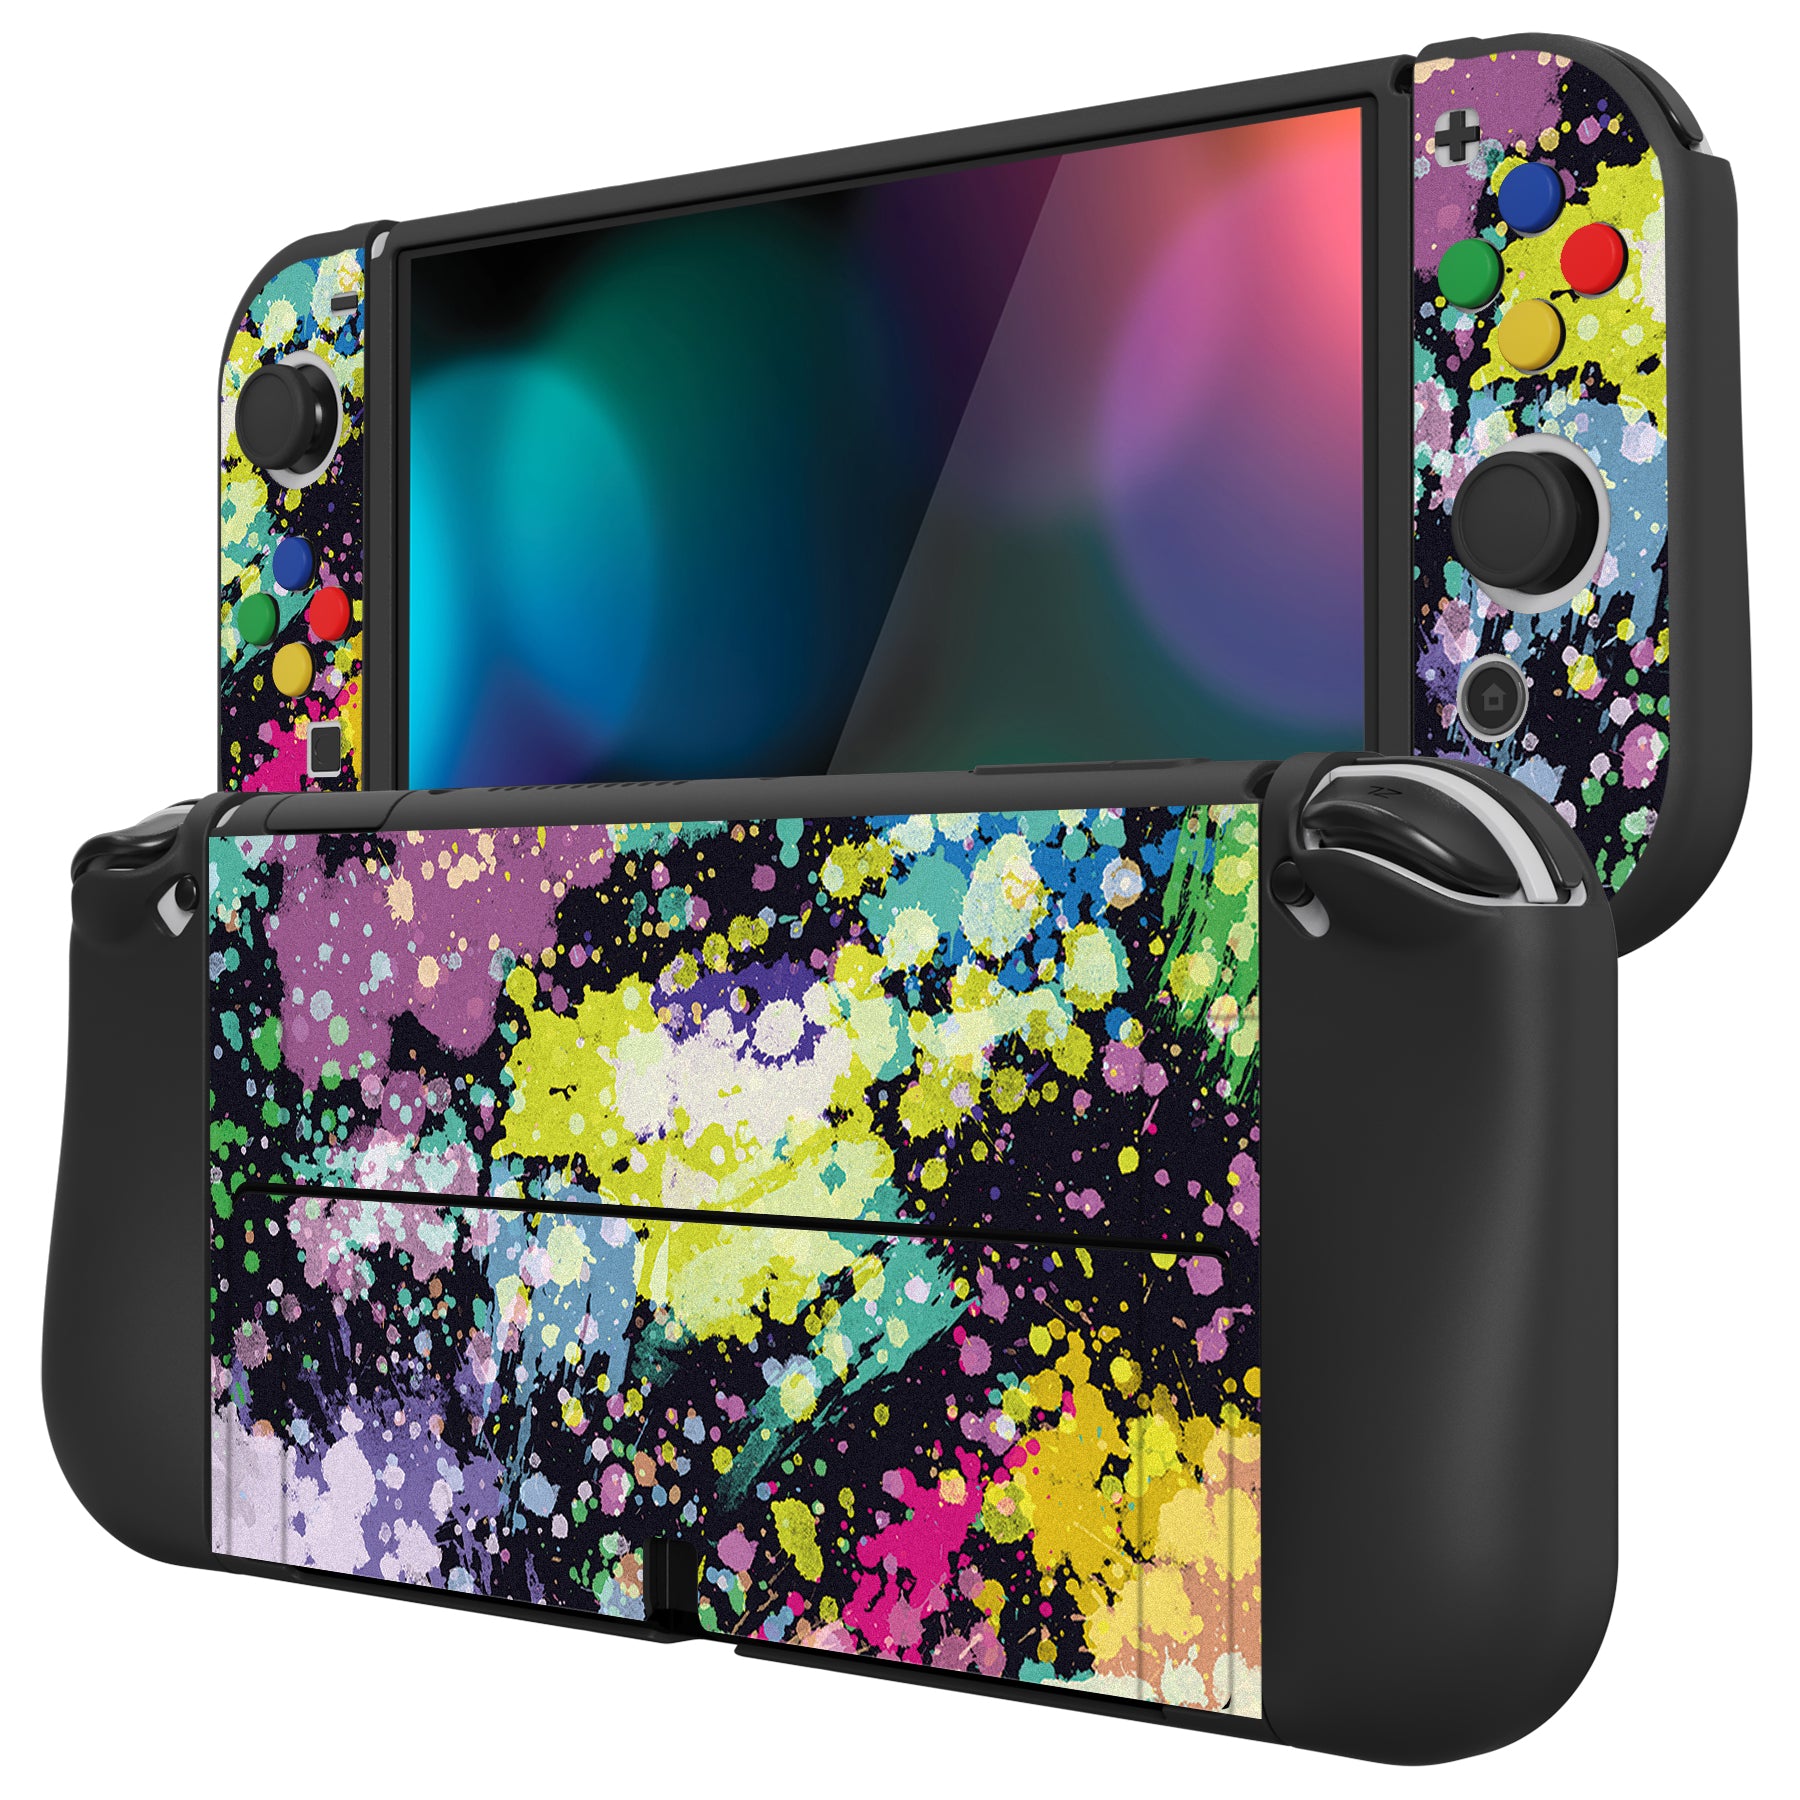 PlayVital ZealProtect Soft Protective Case for Switch OLED, Flexible Protector Joycon Grip Cover for Switch OLED with Thumb Grip Caps & ABXY Direction Button Caps - Watercolour Splash - XSOYV6004 playvital